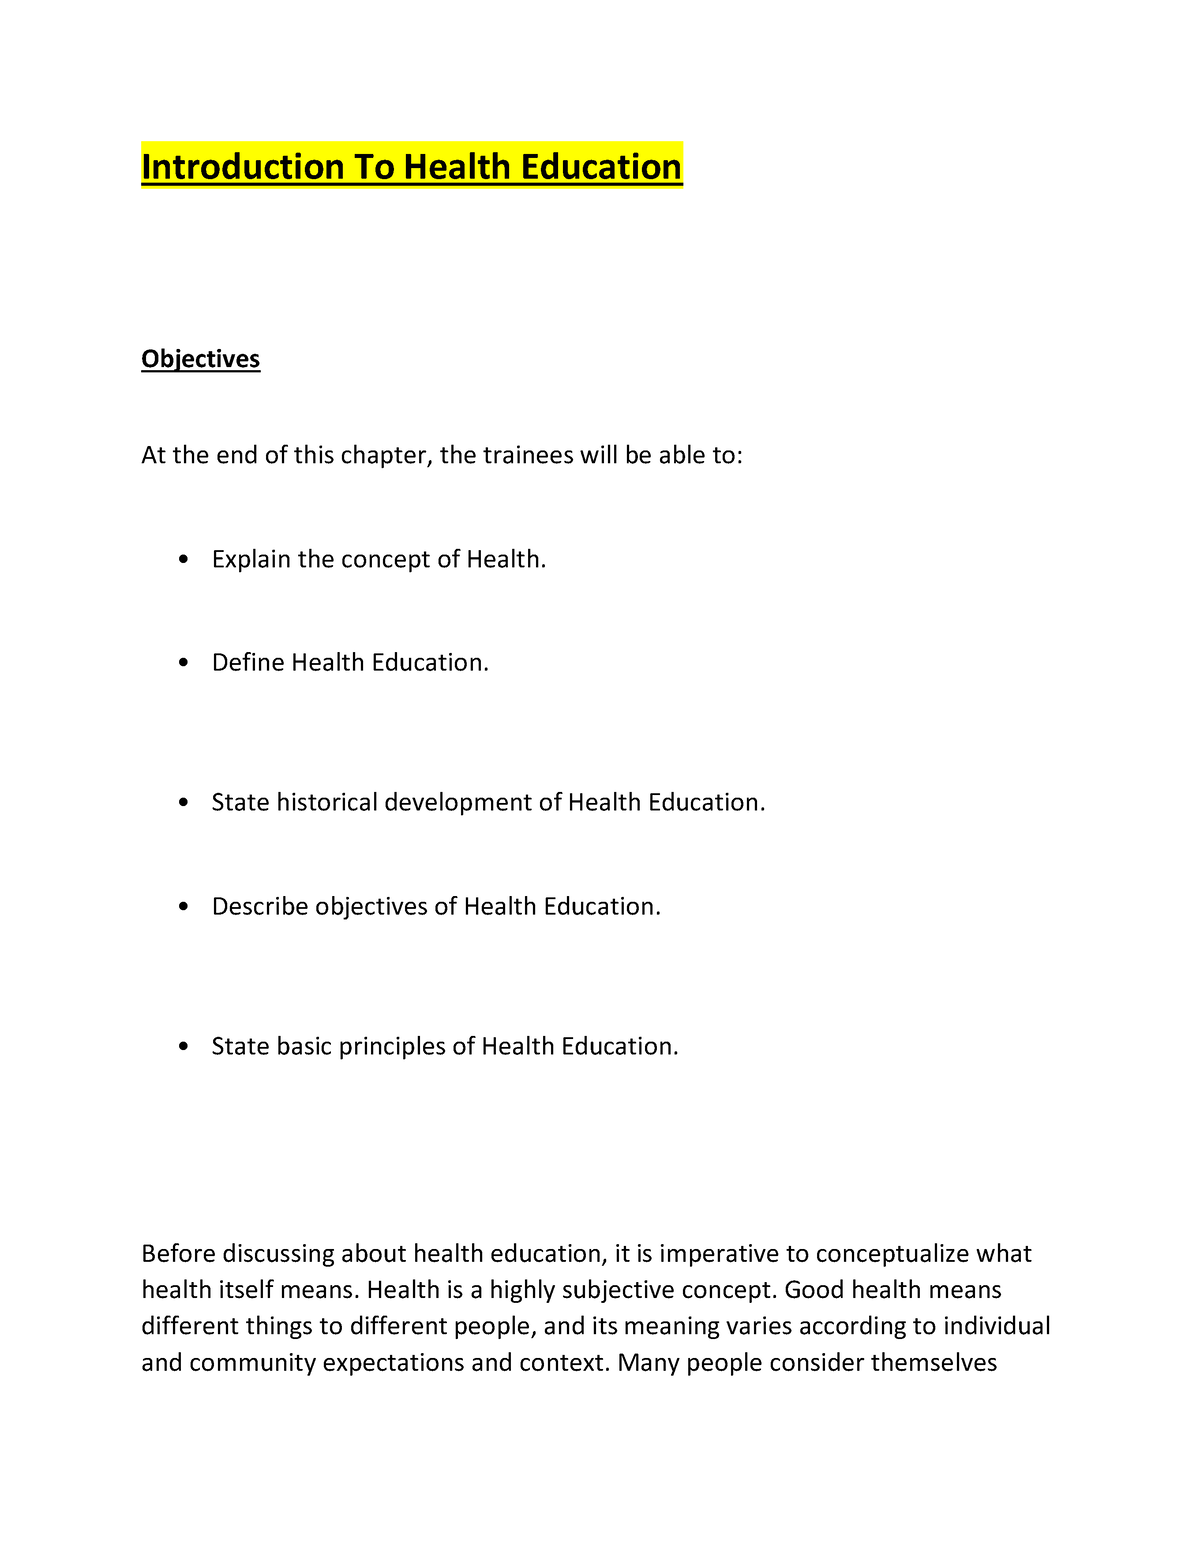 research paper about health education